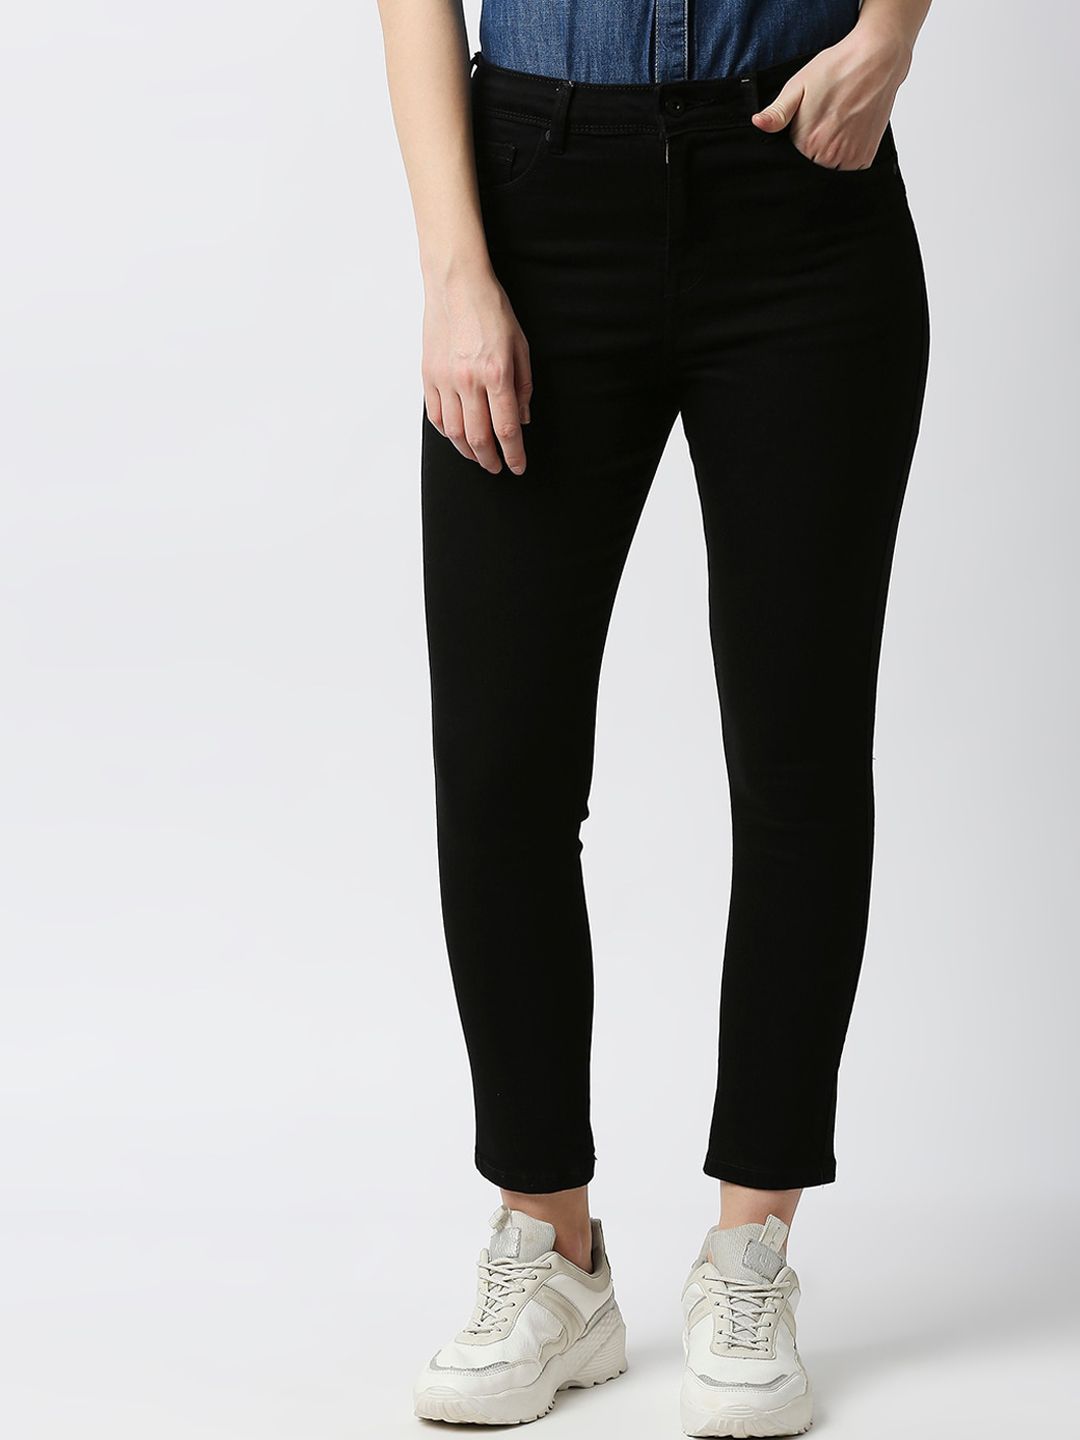 Pepe Jeans Women Black Skinny Fit High-Rise Cotton Jeans Price in India